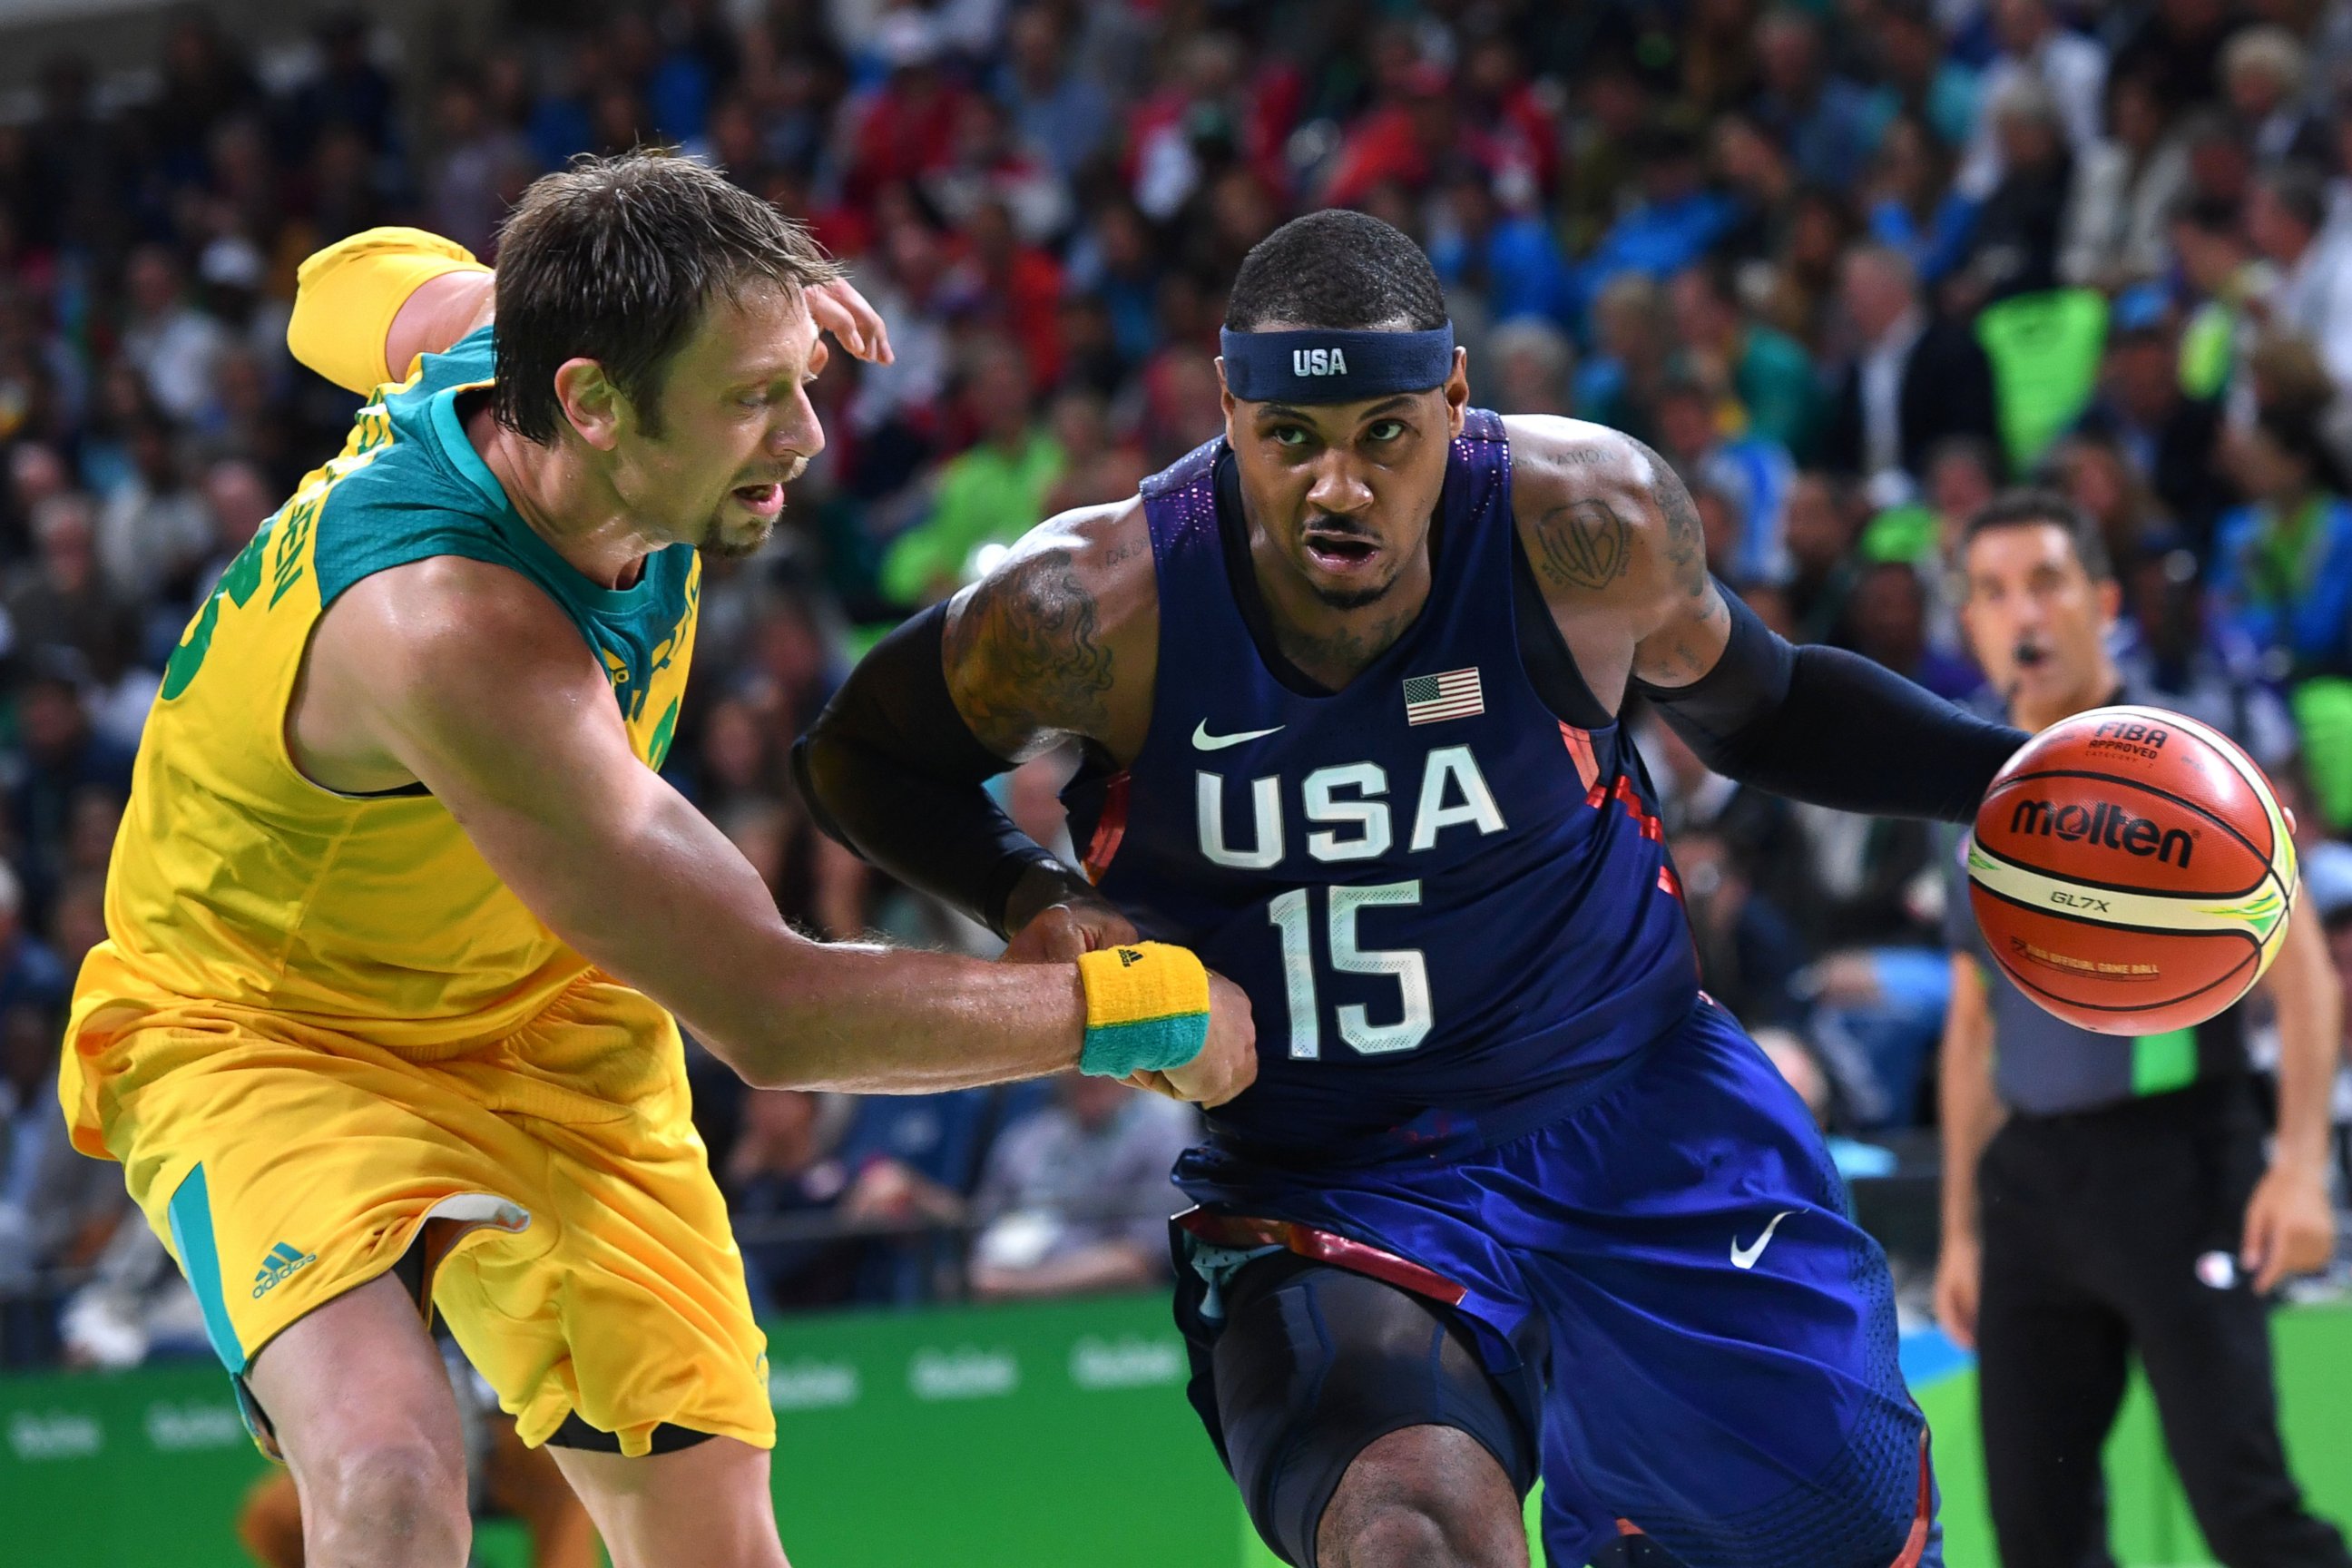 PHOTO: Australia's centre David Andersen vies with USA's forward Carmelo Anthony during a Men's basketball match between Australia and USA at the Carioca Arena 1 on Aug. 10, 2016 during the Rio 2016 Olympic Games.